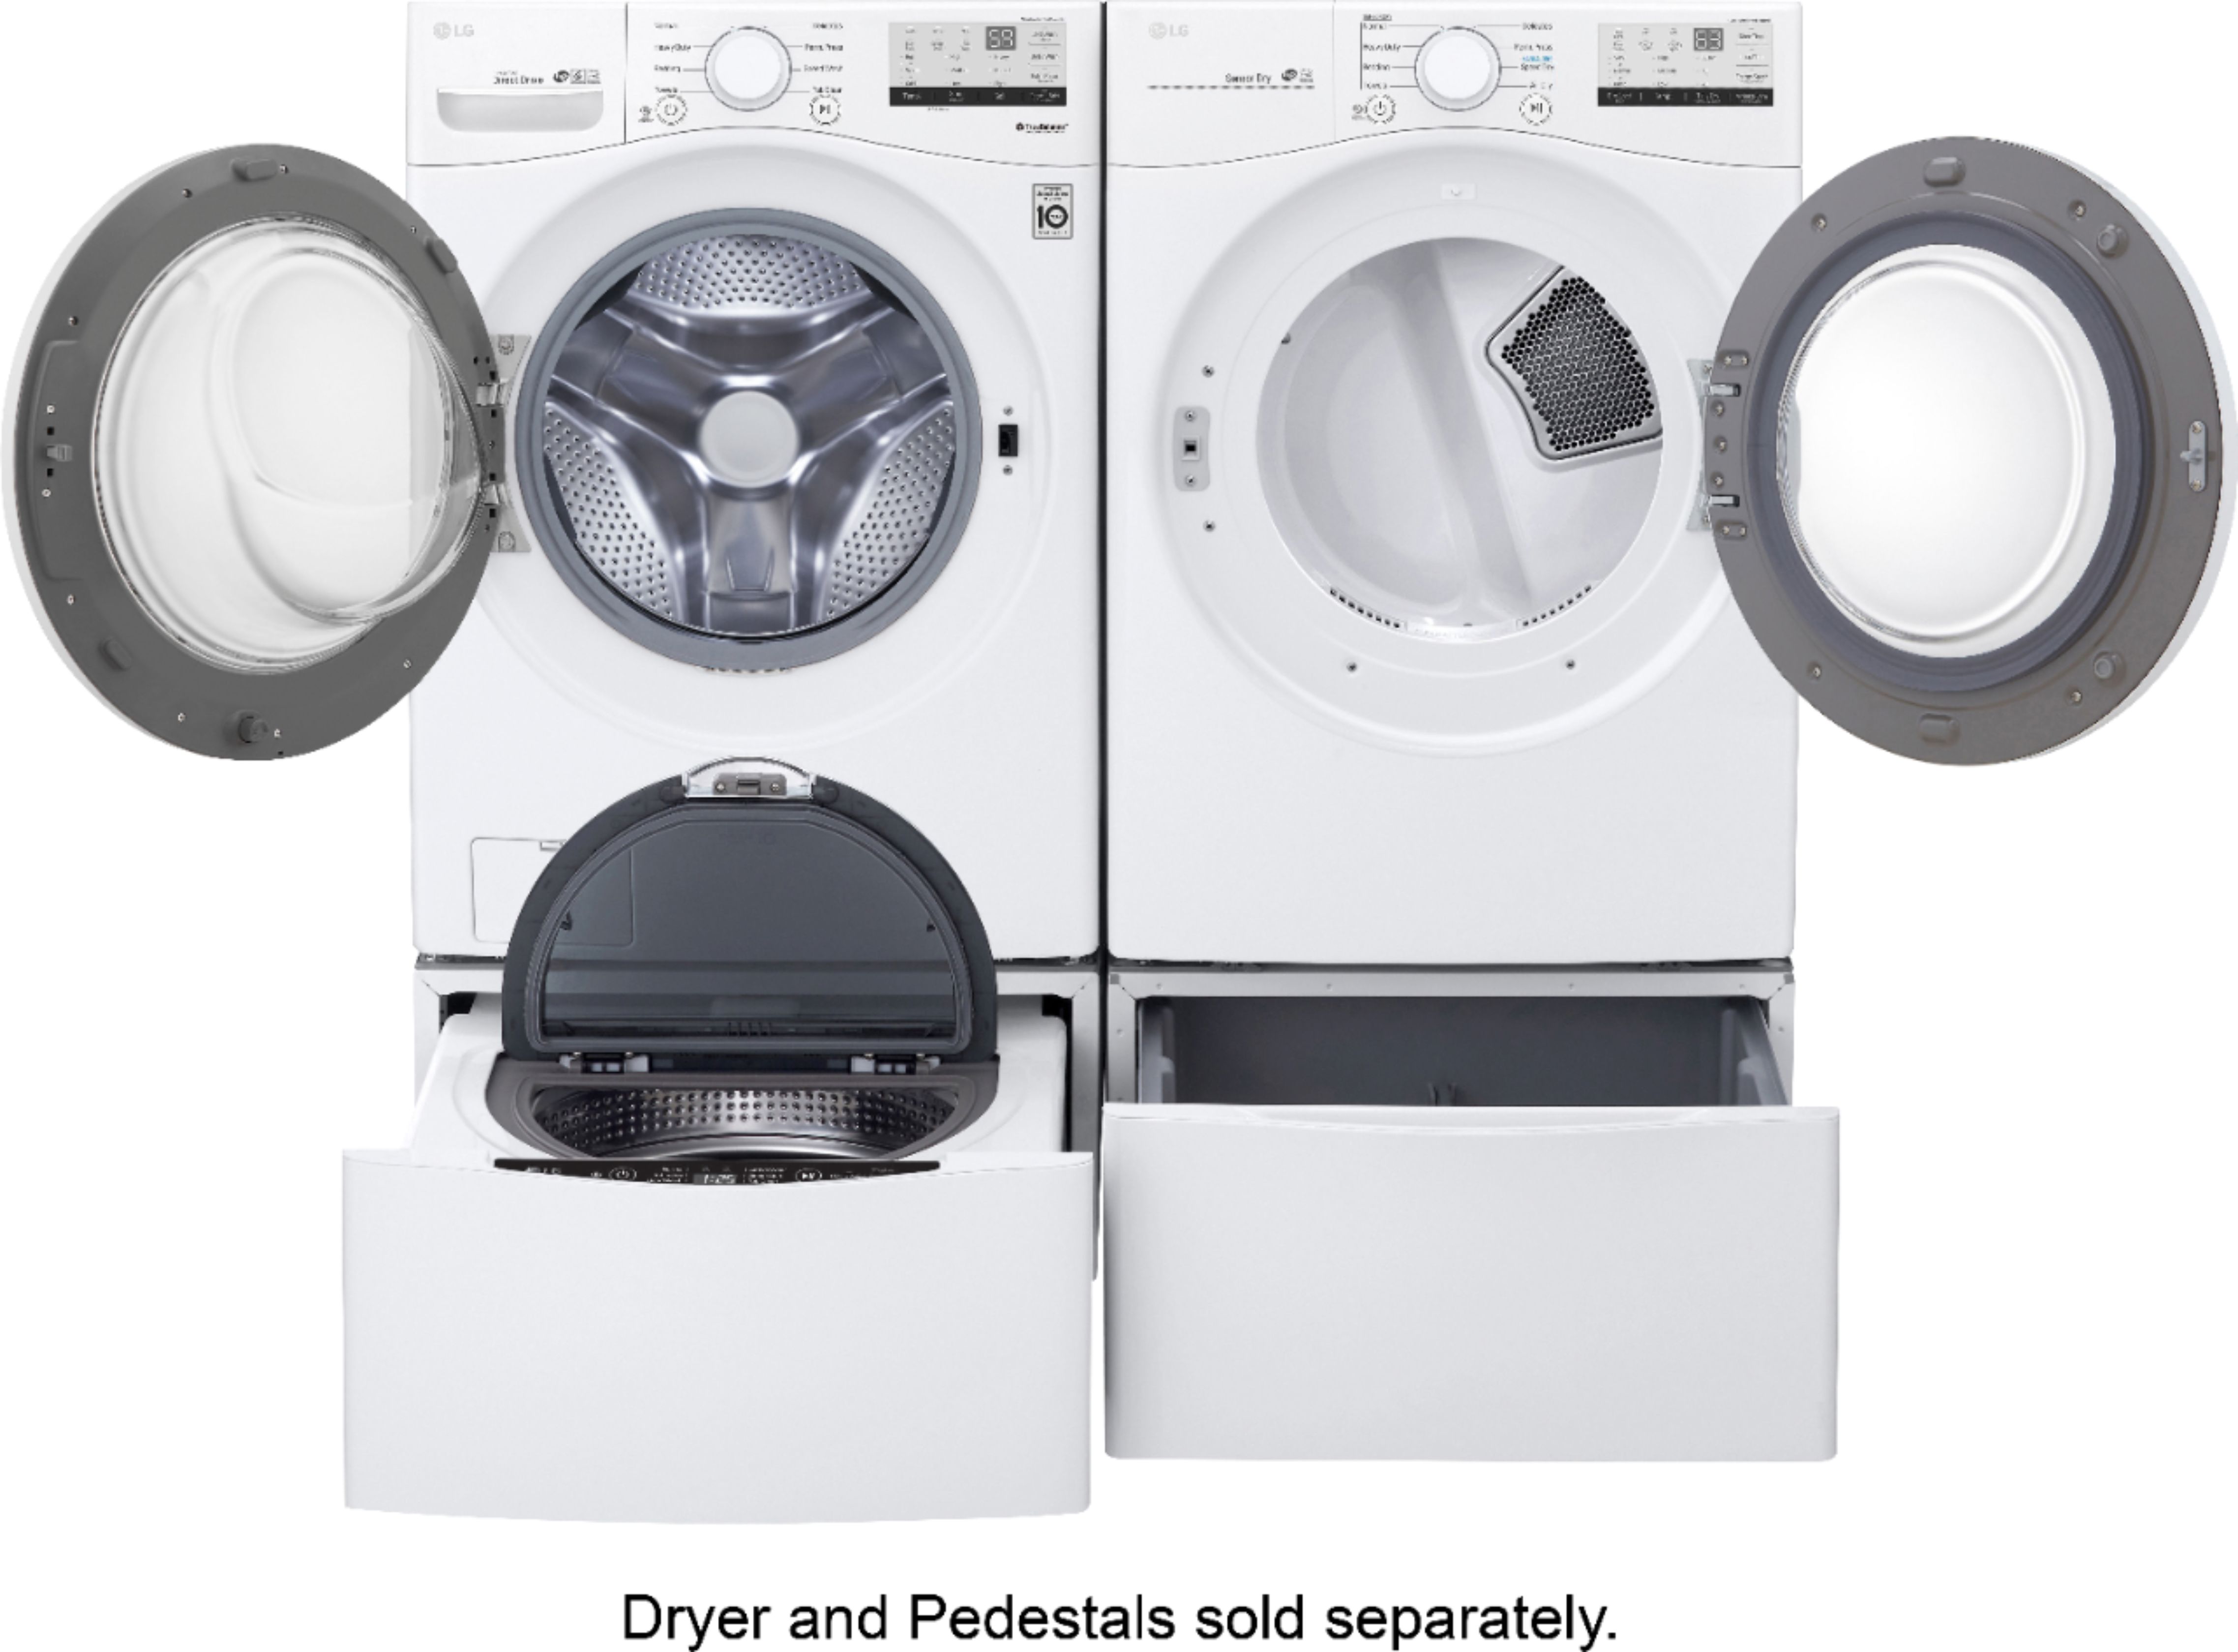 LG 27 in. 5.0 cu. ft. Stackable Front Load Washer with 6 Motion Technology,  Tub Clean System & Speed Wash Cycle - White